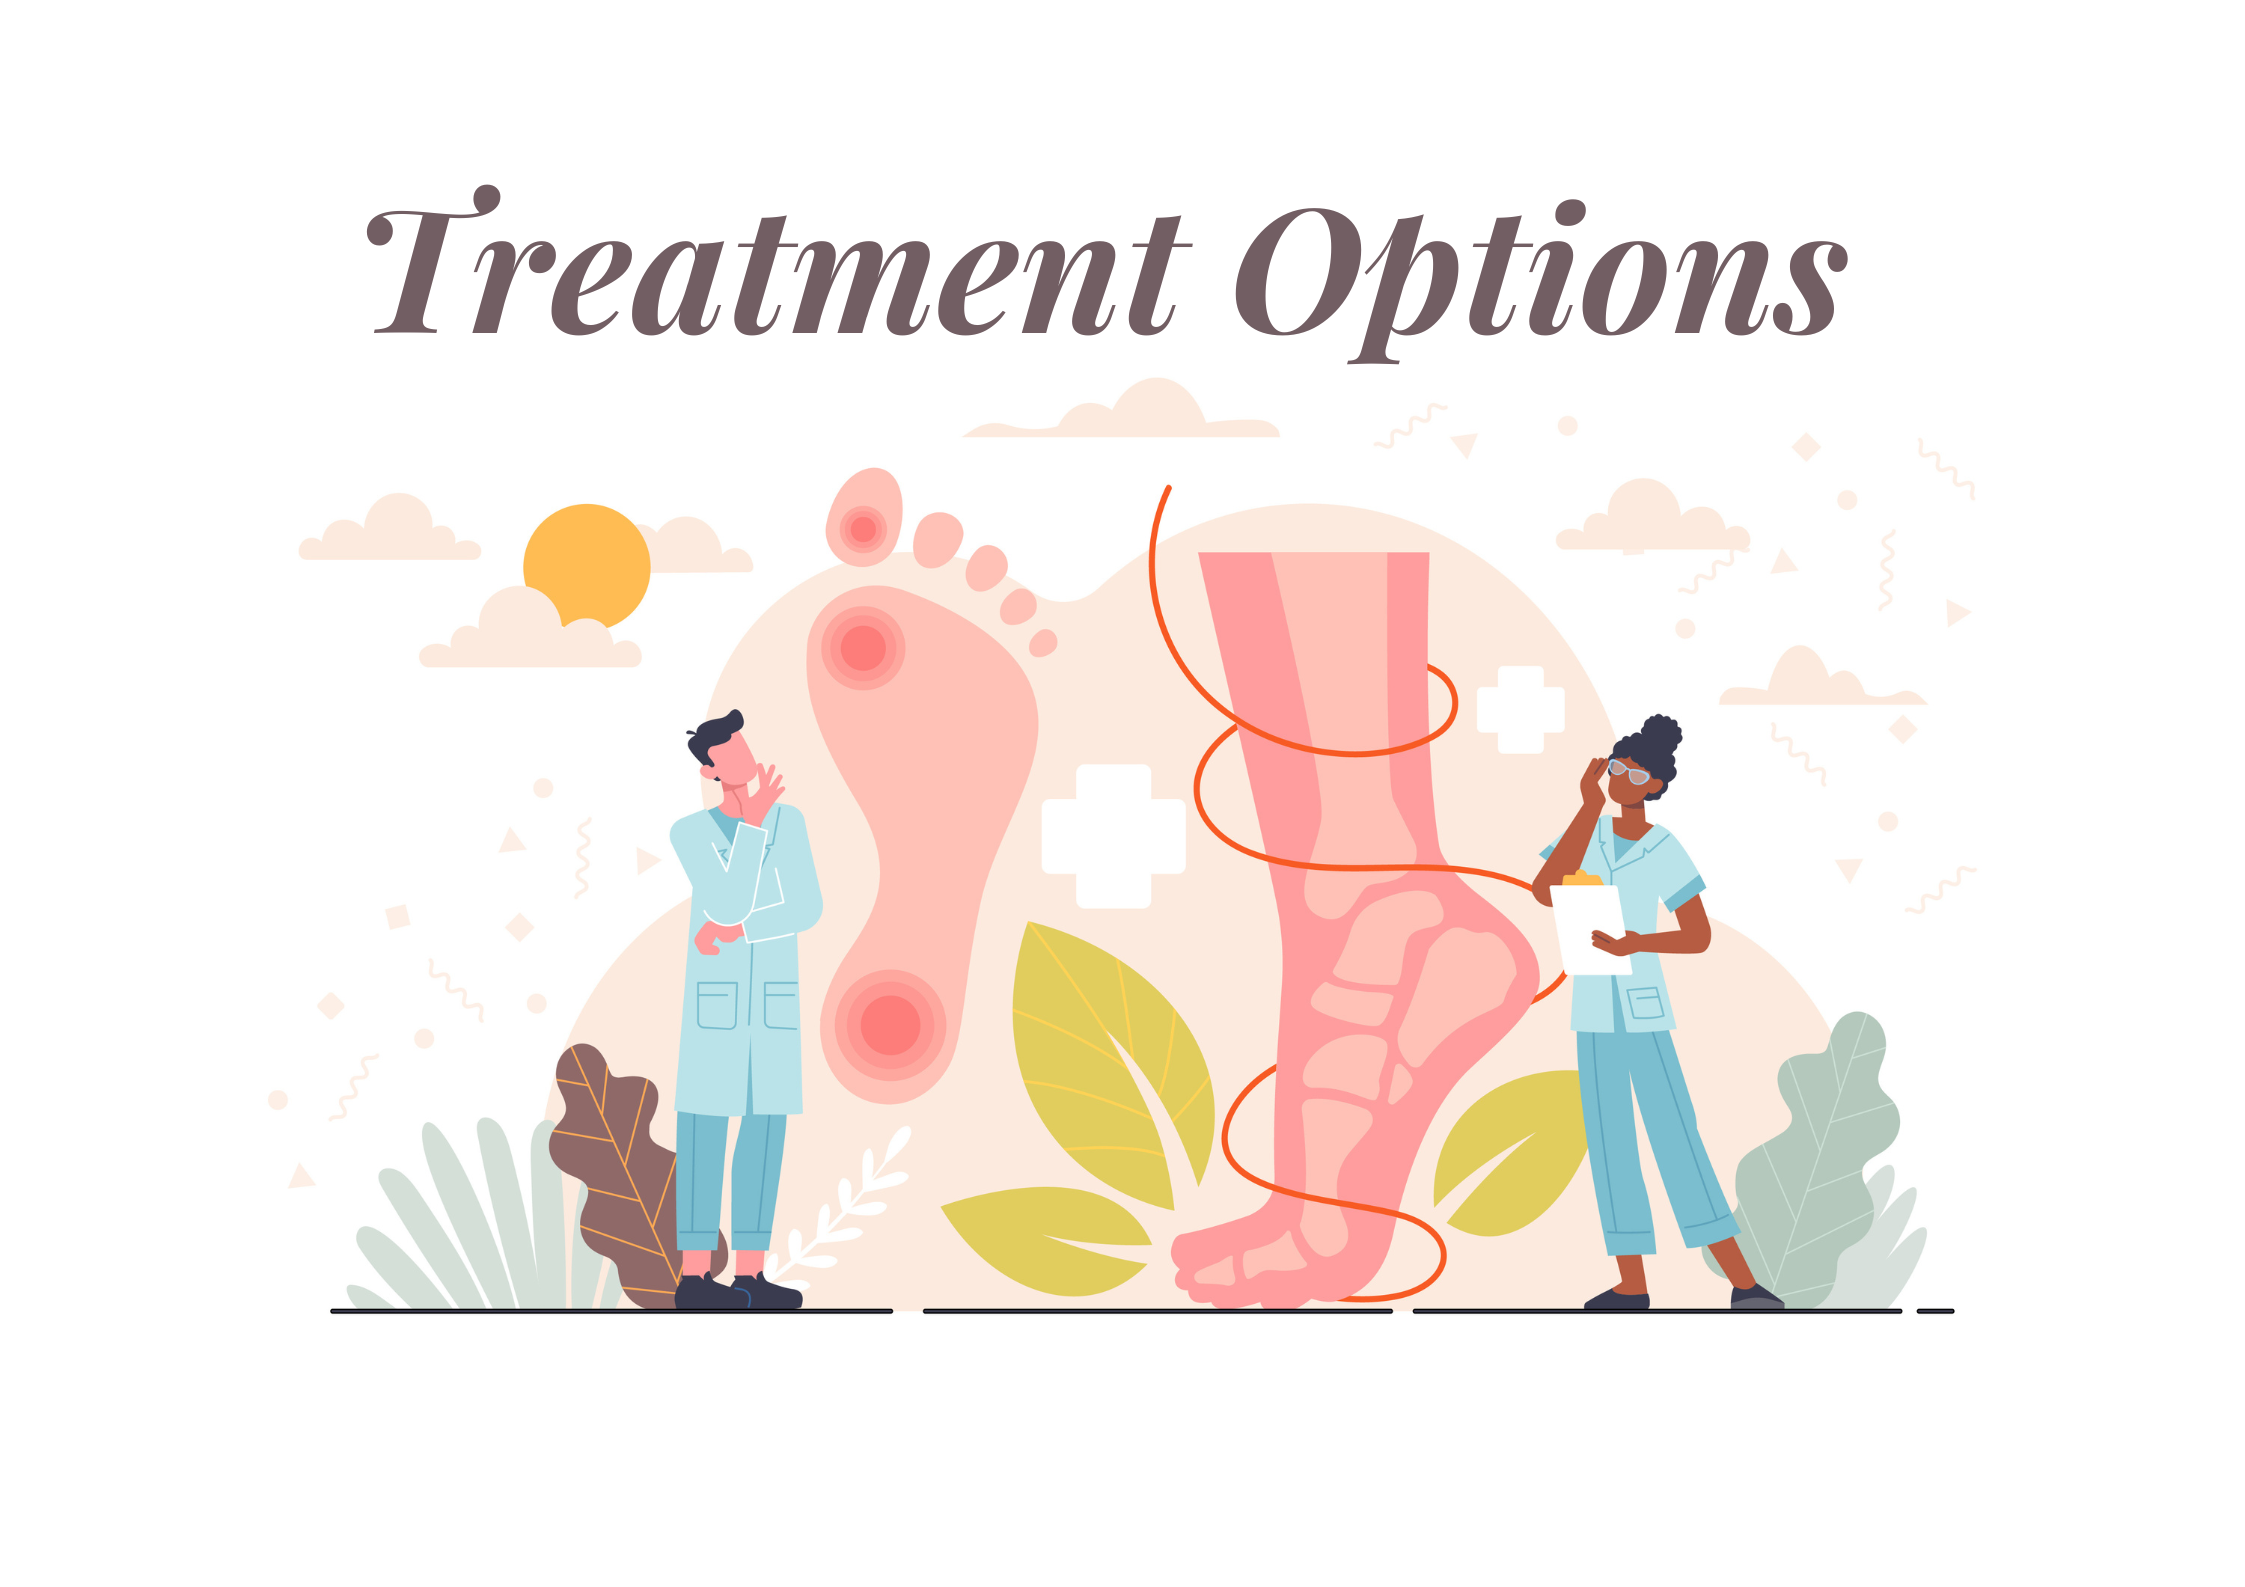 Our Treatment Options